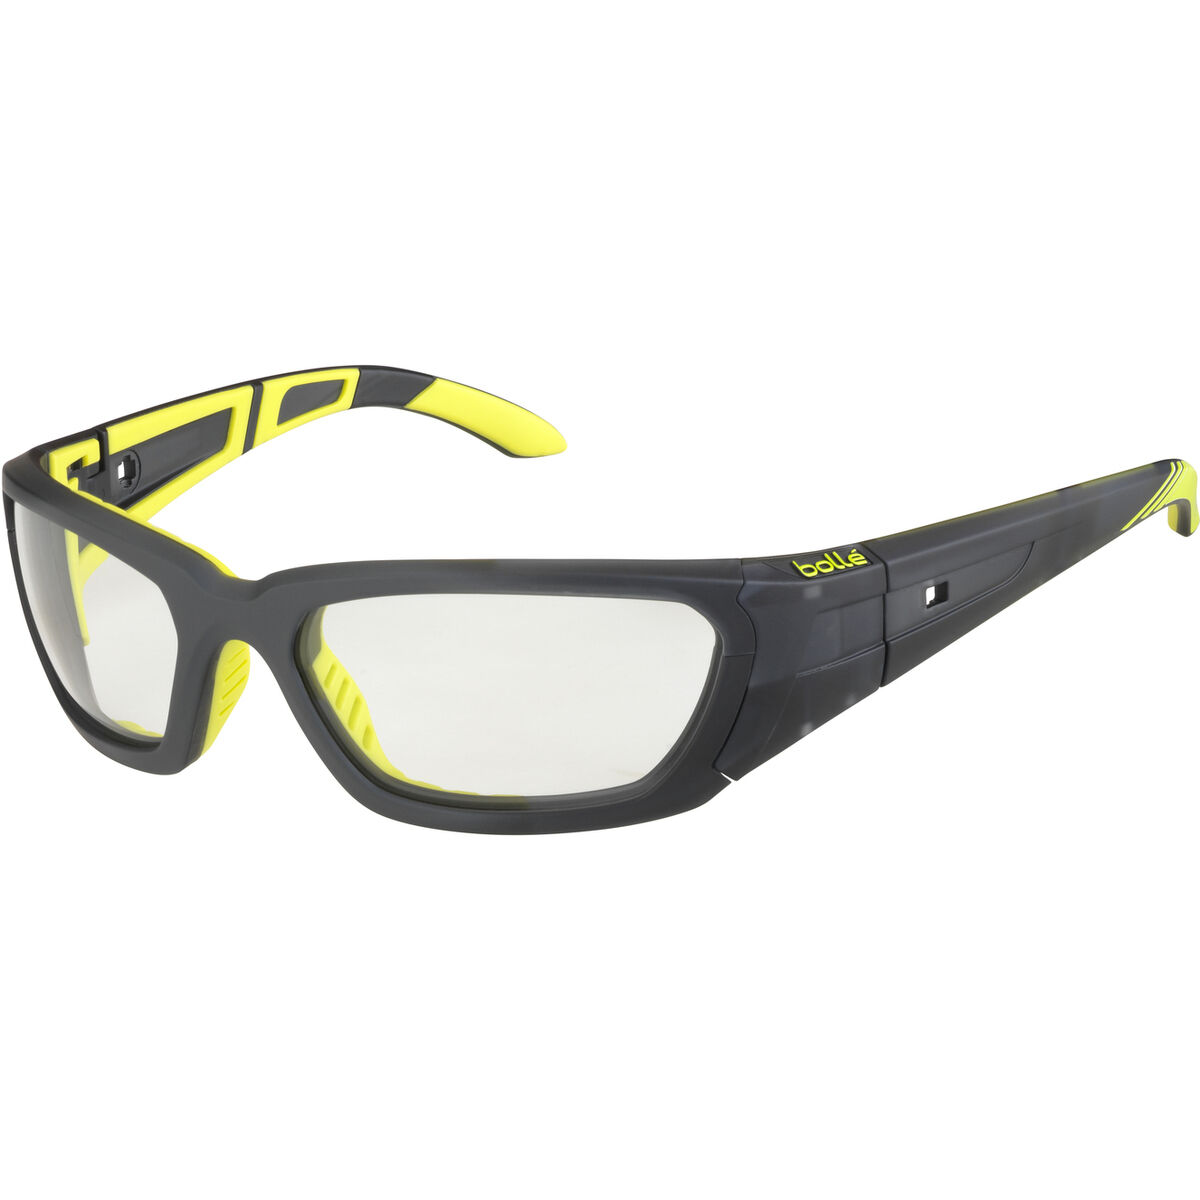 sports safety glasses goggles with yellow lens Bolle Tracker strap and arms 